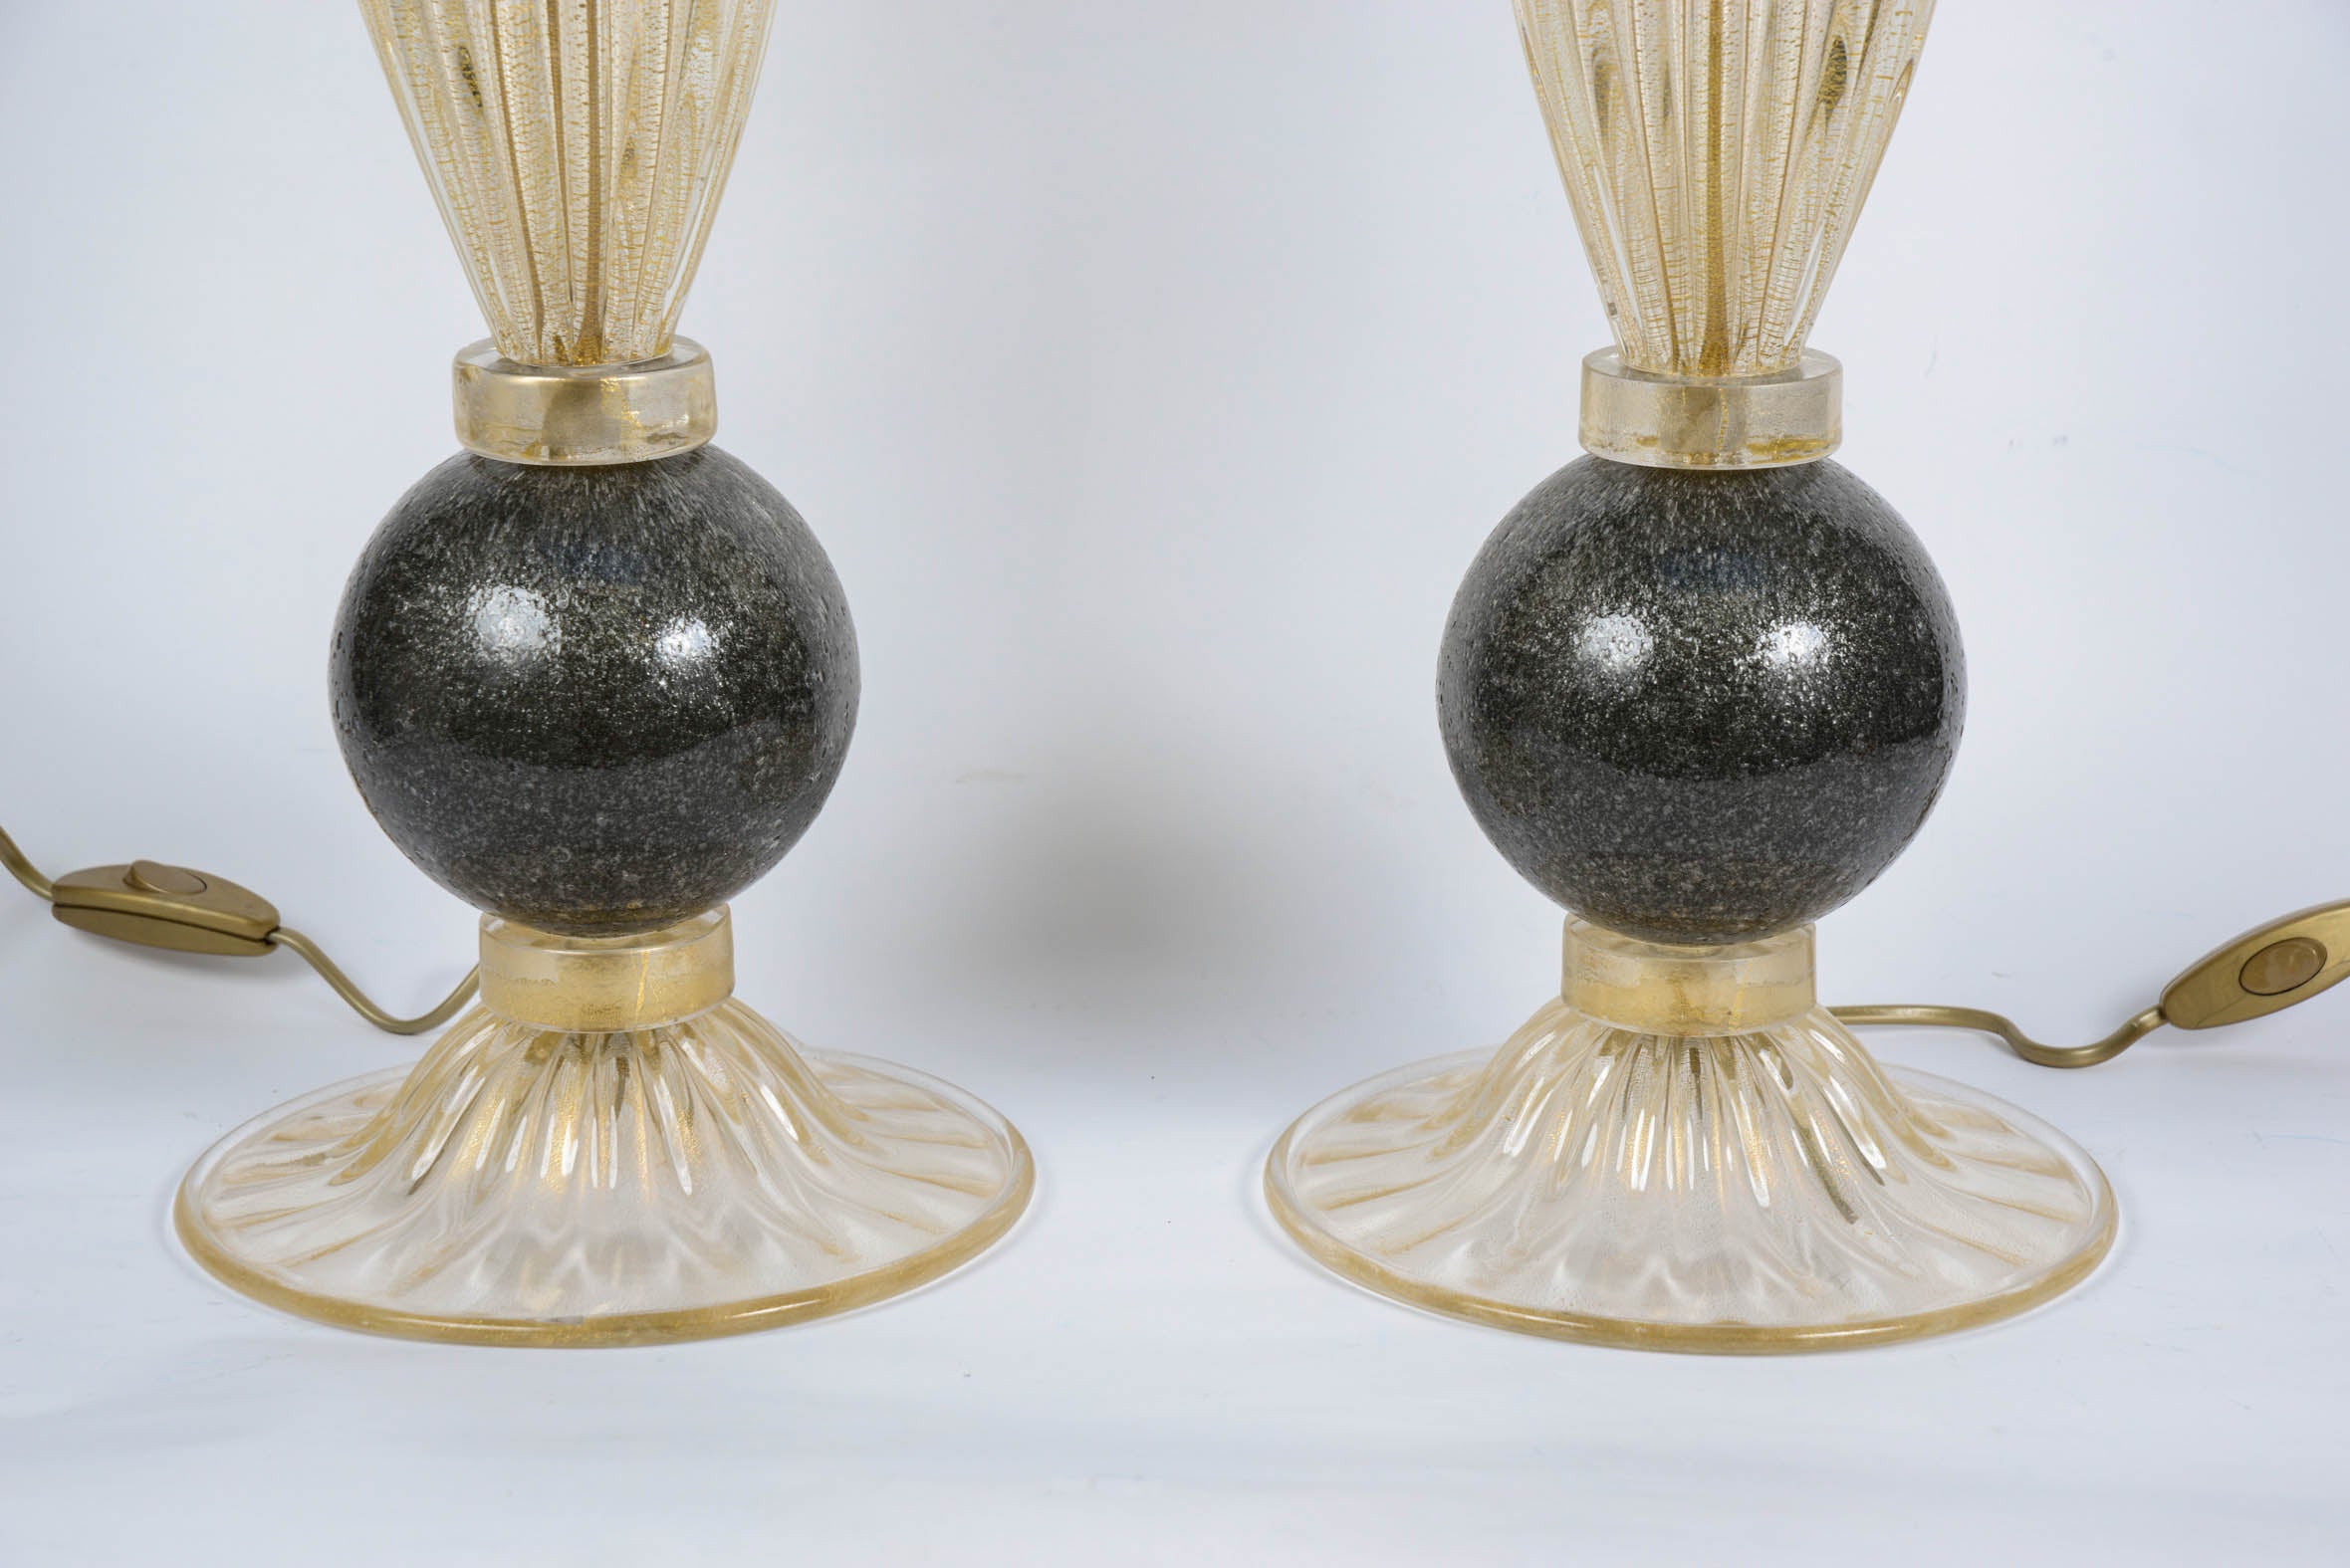 Pair of table lamps in Murano glass signed "Toso Murano".